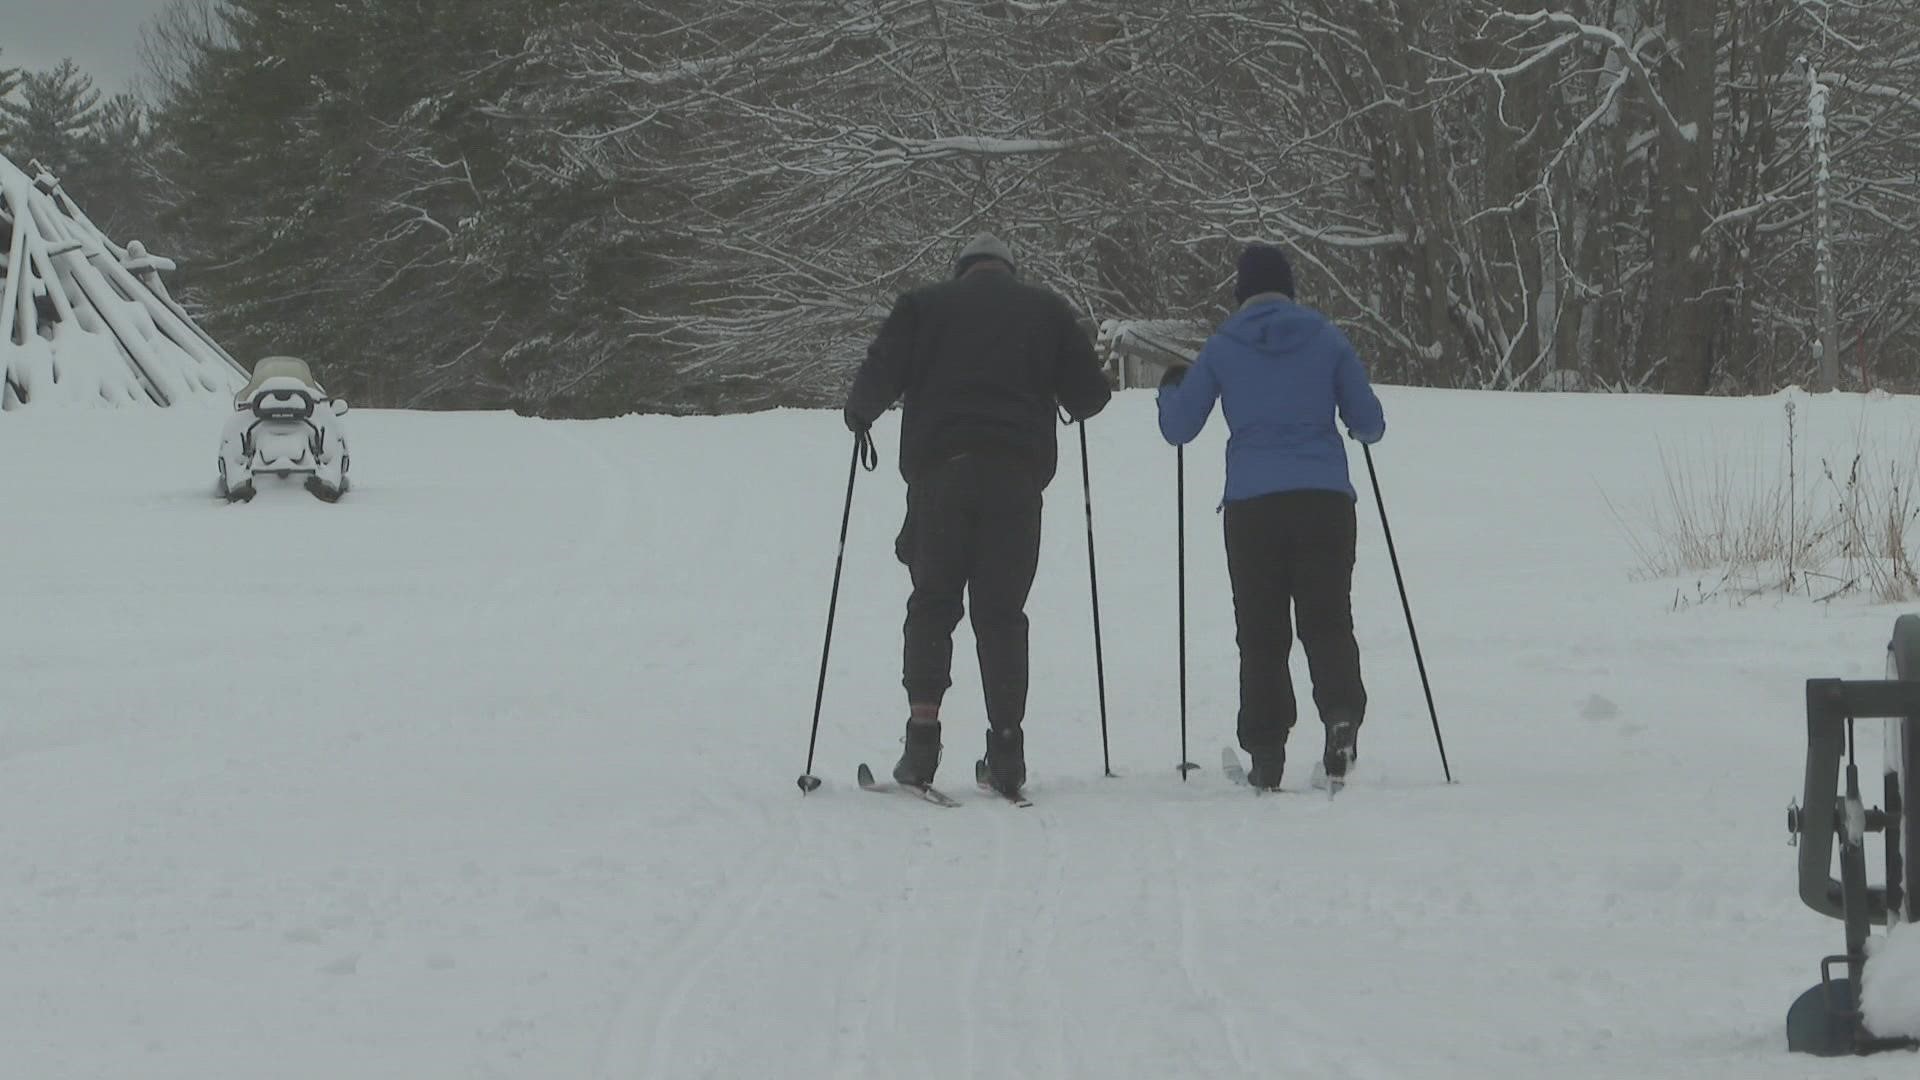 Smiling Hill Farm in Westbrook and Oxbow Beer Garden in Oxford both opened ski trails for the first time this season.